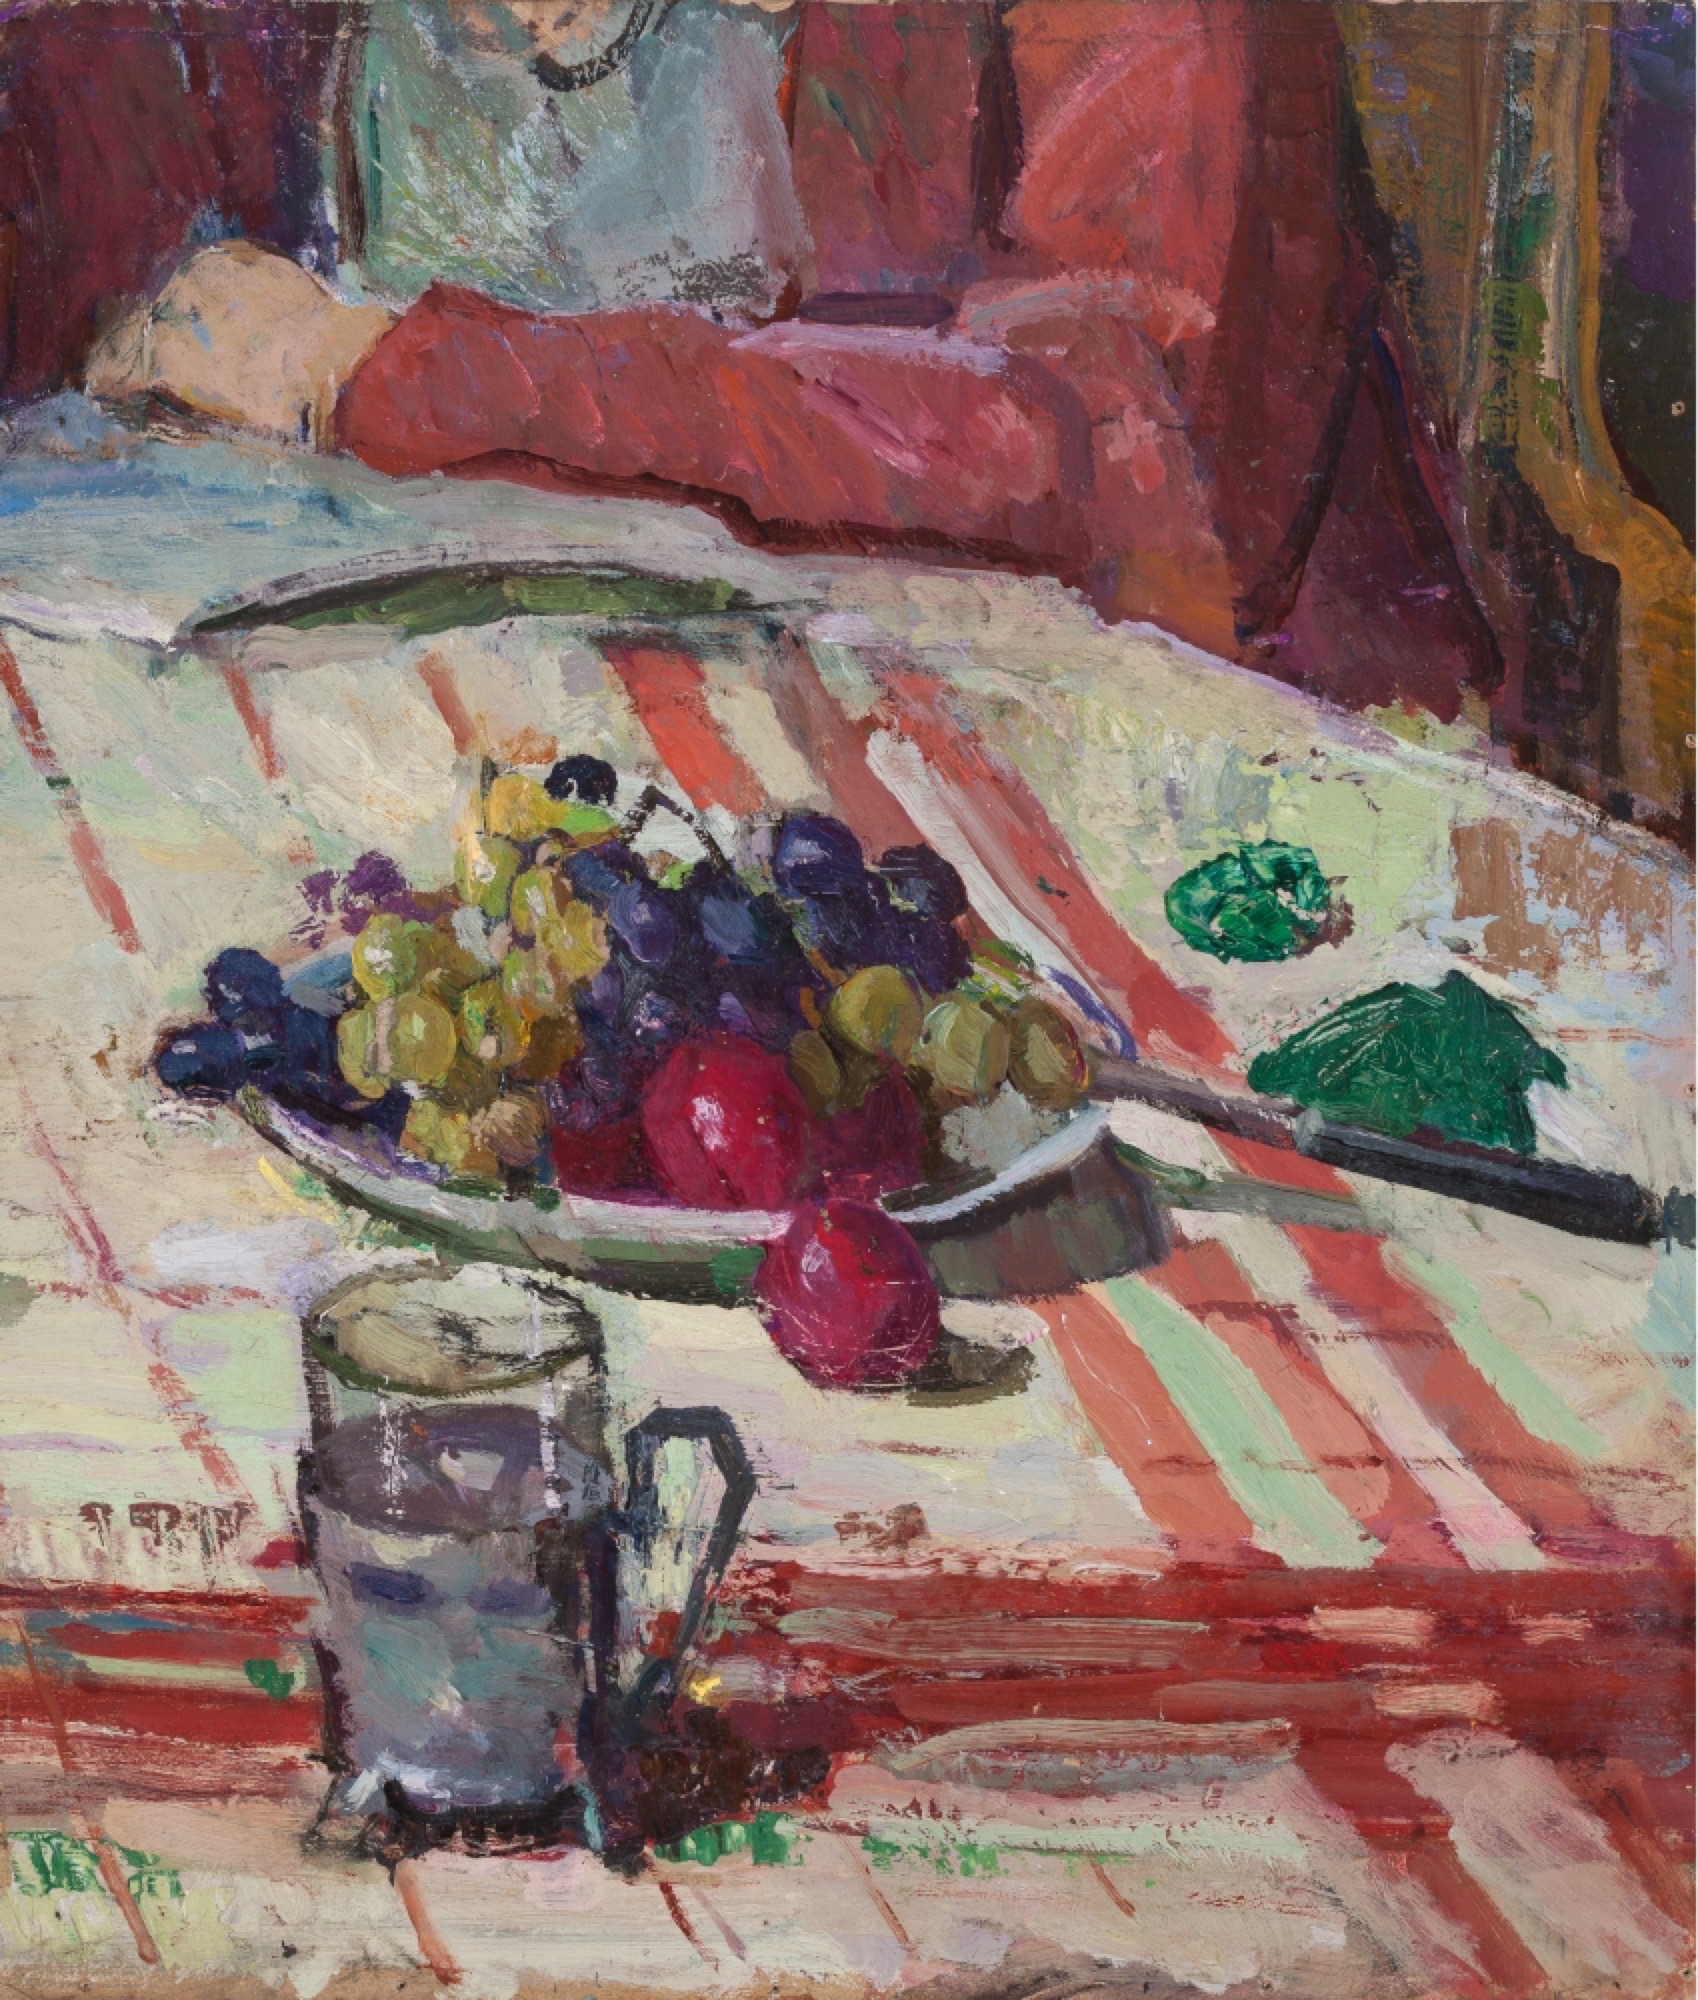 Bessie Davidson, <em>Still life with a bowl of fruit</em>, c. 1935, oil on card, 40 x 46 cm, private collection, courtesy of Lauraine Diggins Fine Art.